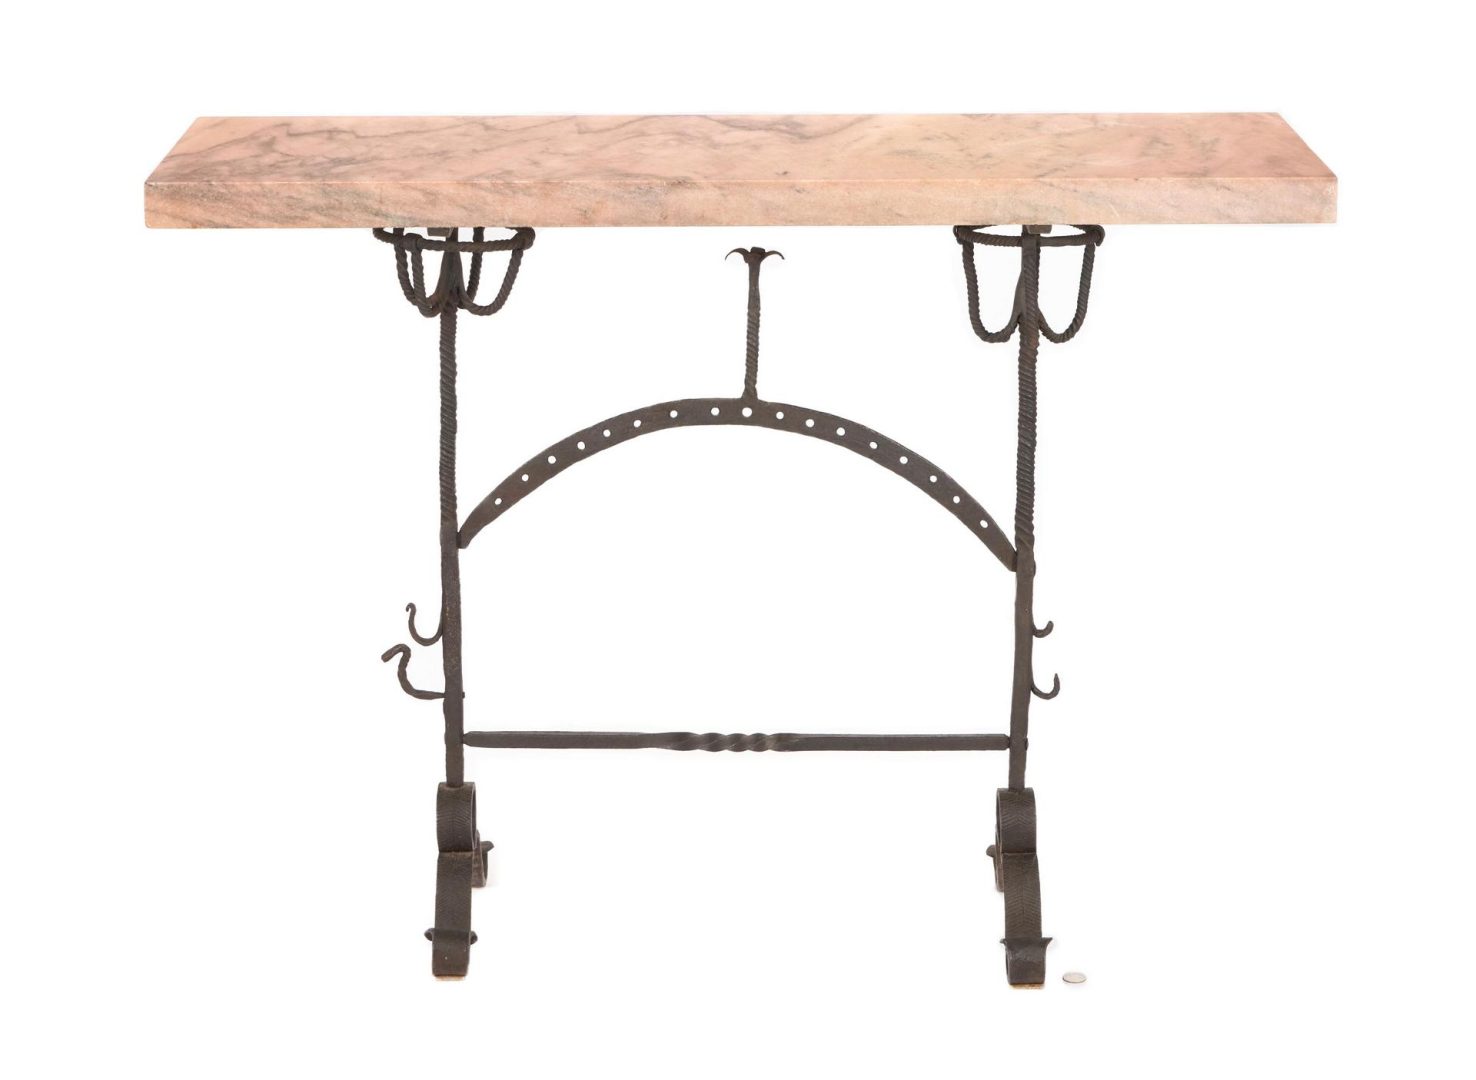 Lot 285: Italian Marble Wrought Iron Console Table with Wrought Iron Mirror, Two (2) Items